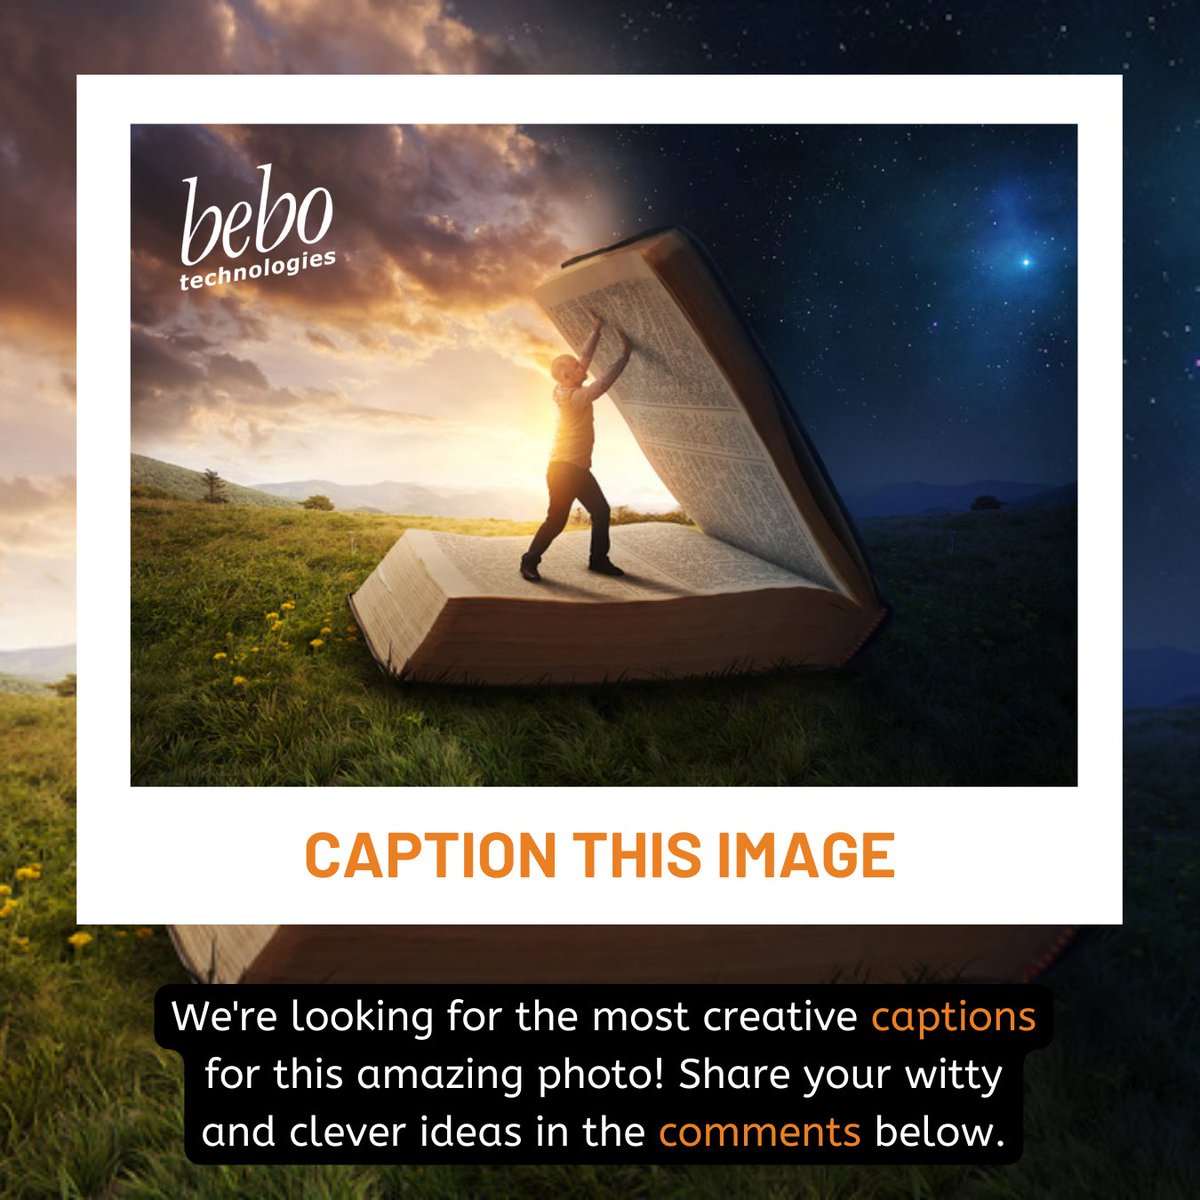 Dive into creativity with bebo Technologies! We're on the hunt for the best captions. Share your most creative captions for this stunning photo in the comments. 

#ImageCaption #CaptionChallenge #CleverCaptions #CreativeCaptions #beboTechnologies